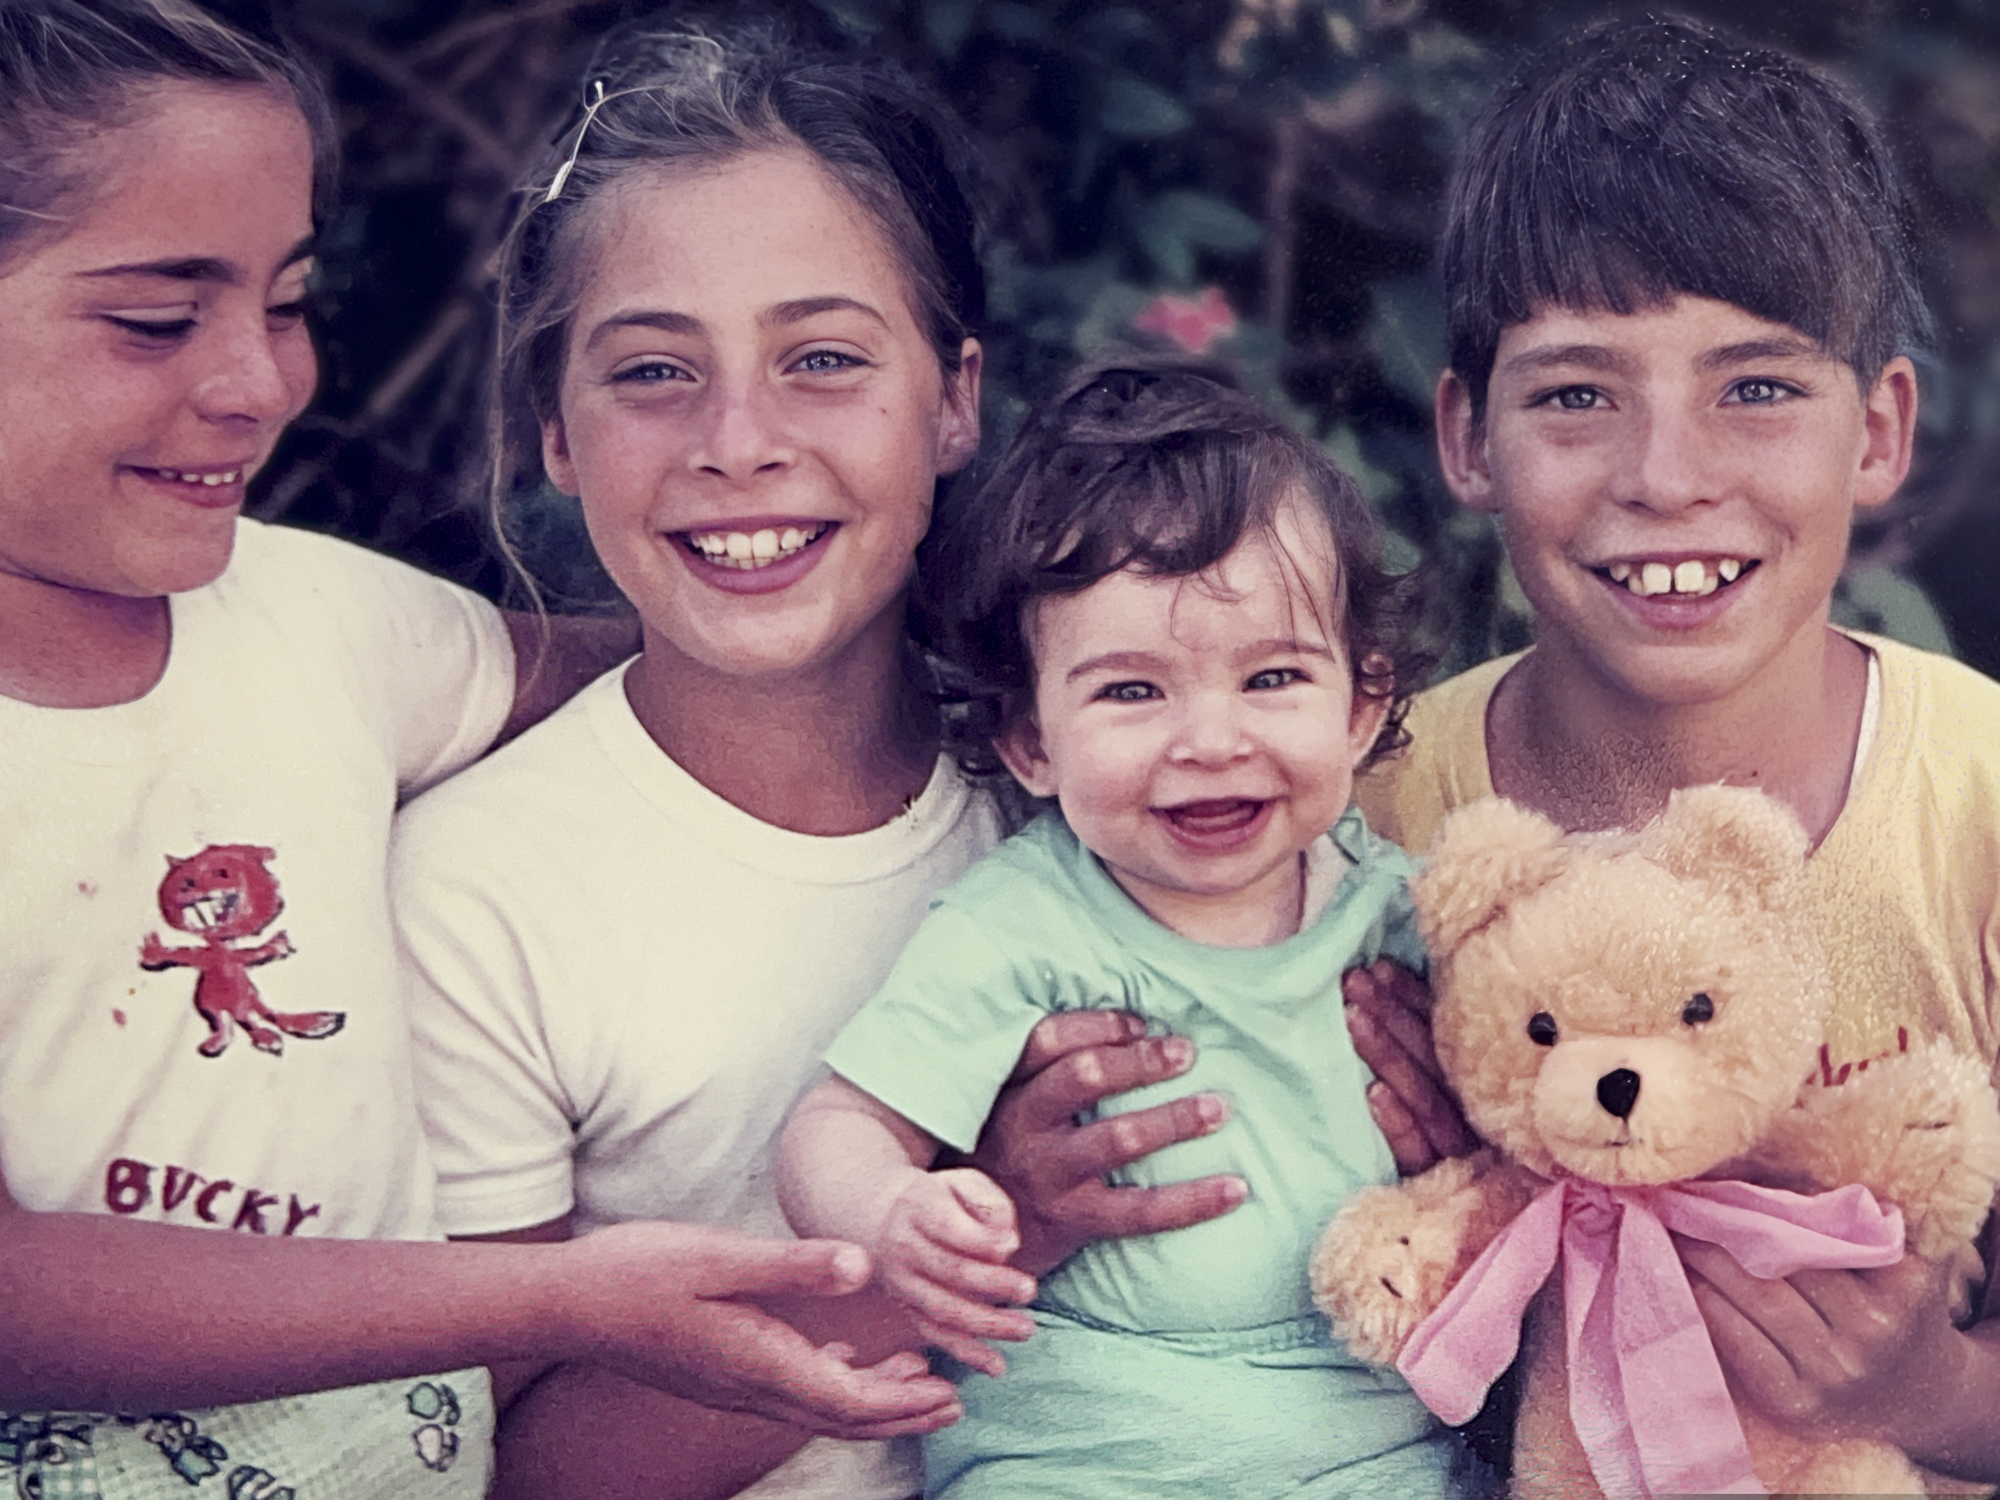 An old photo of four children, ranging in age from an infant to around 10 years old.